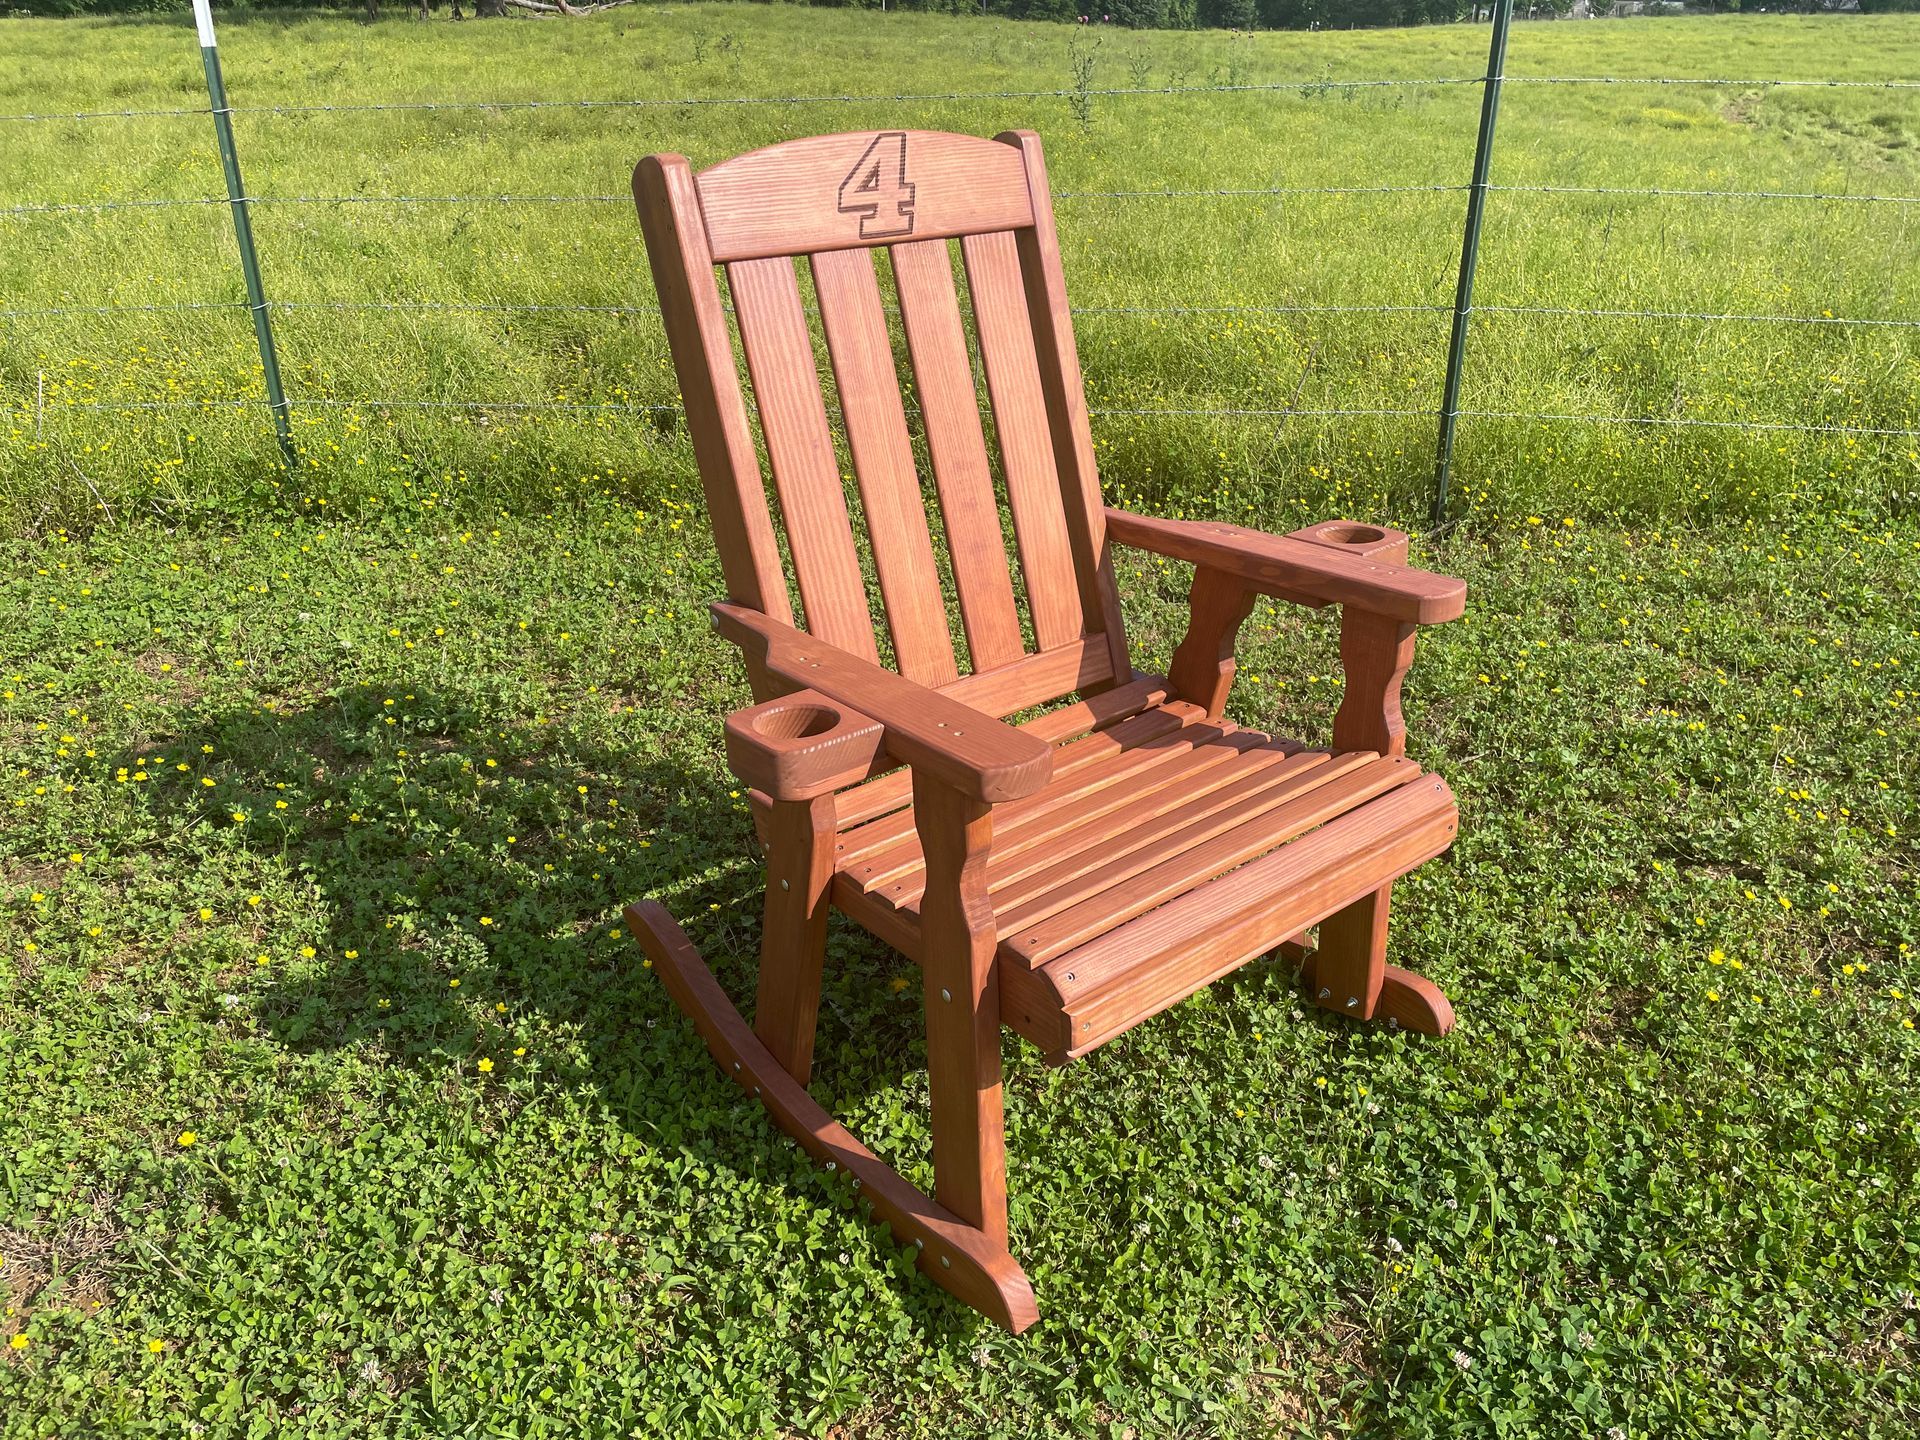 A wooden rocking chair is sitting in the grass in a field.